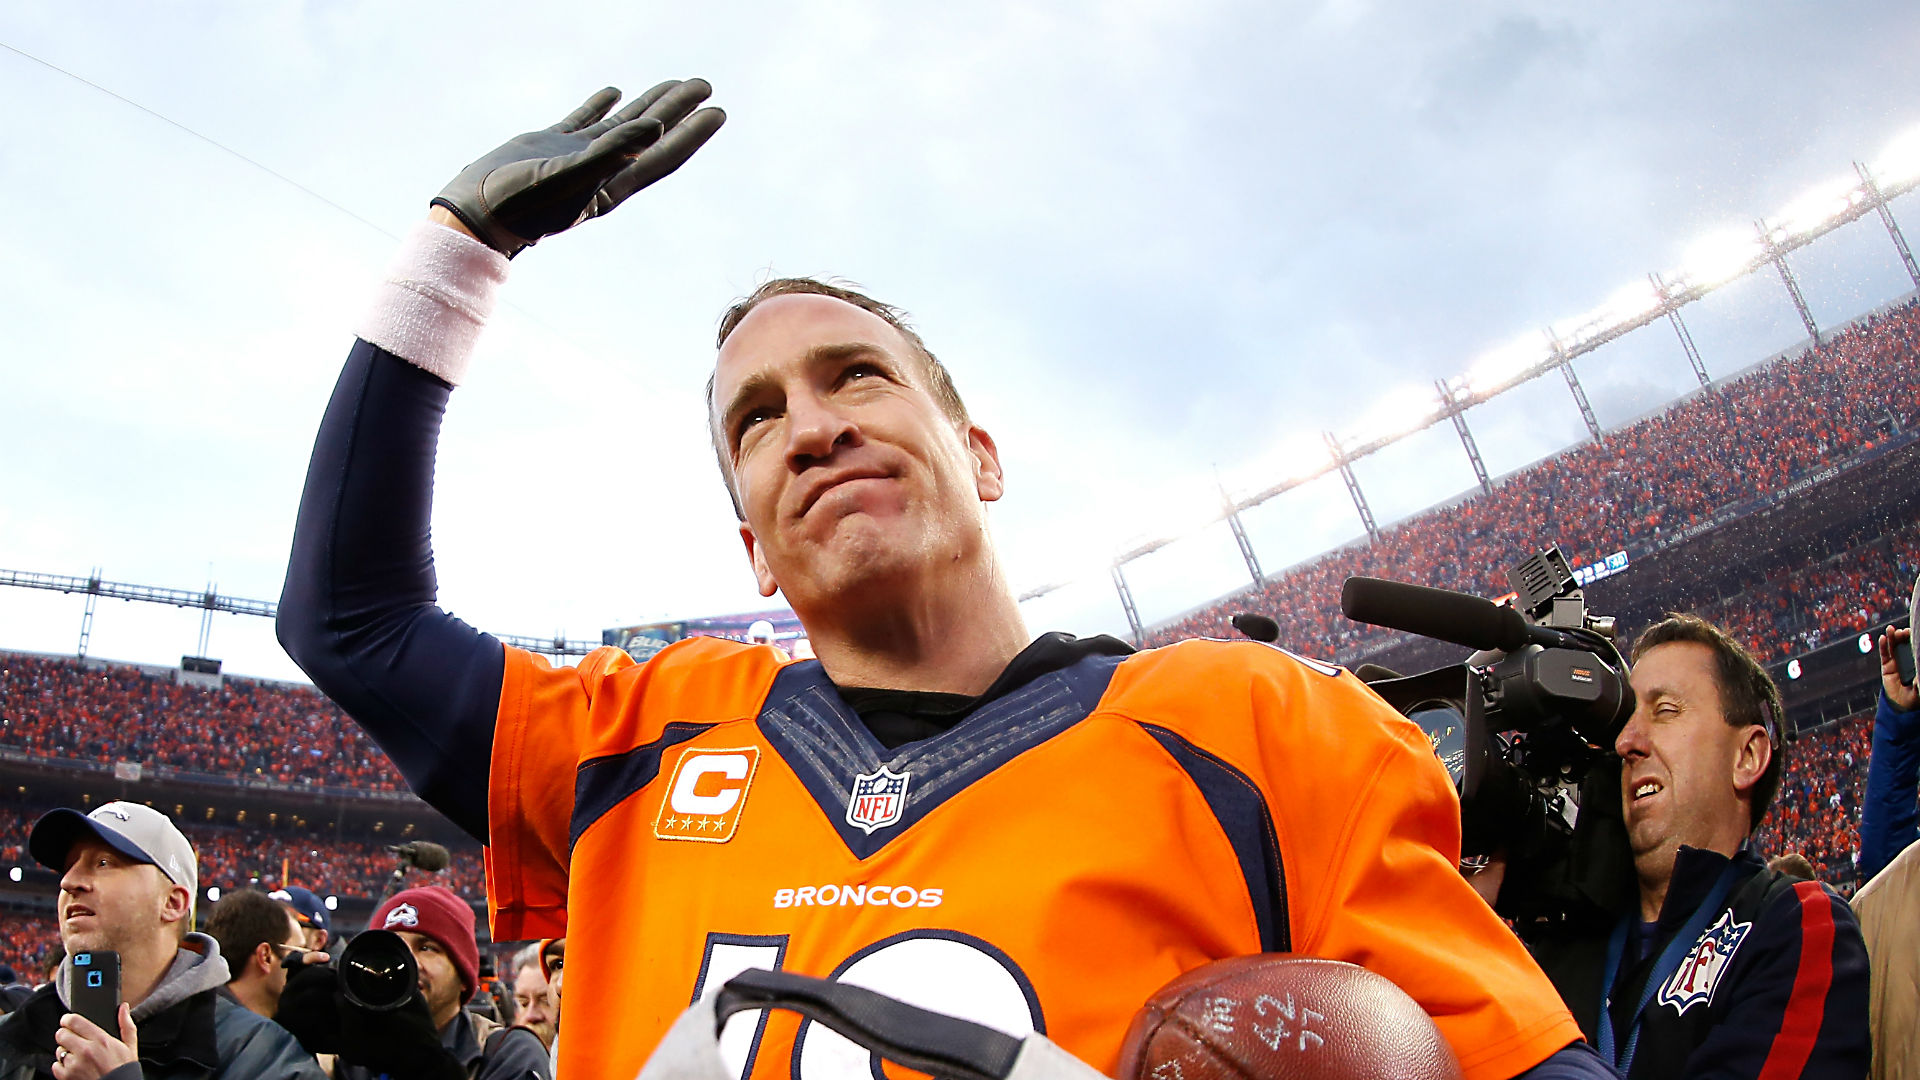 peyton manning finally makes nfl retirement official 2016 images